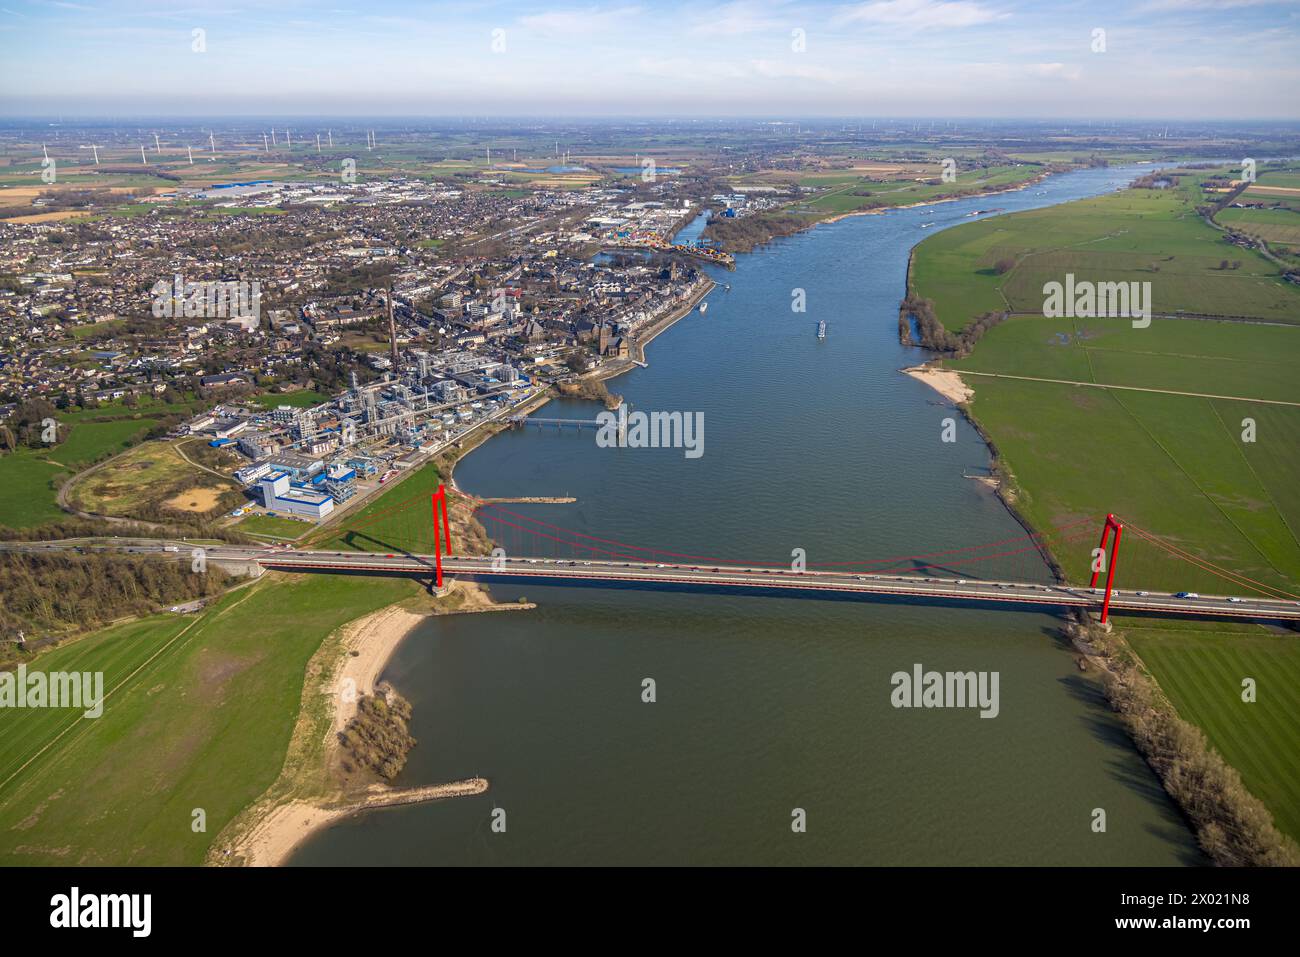 Aerial view, Emmerich Rhine bridge, longest suspension bridge in Germany, Rhine river with city view and KLK Emmerich chemical plant, dike foreland ne Stock Photo